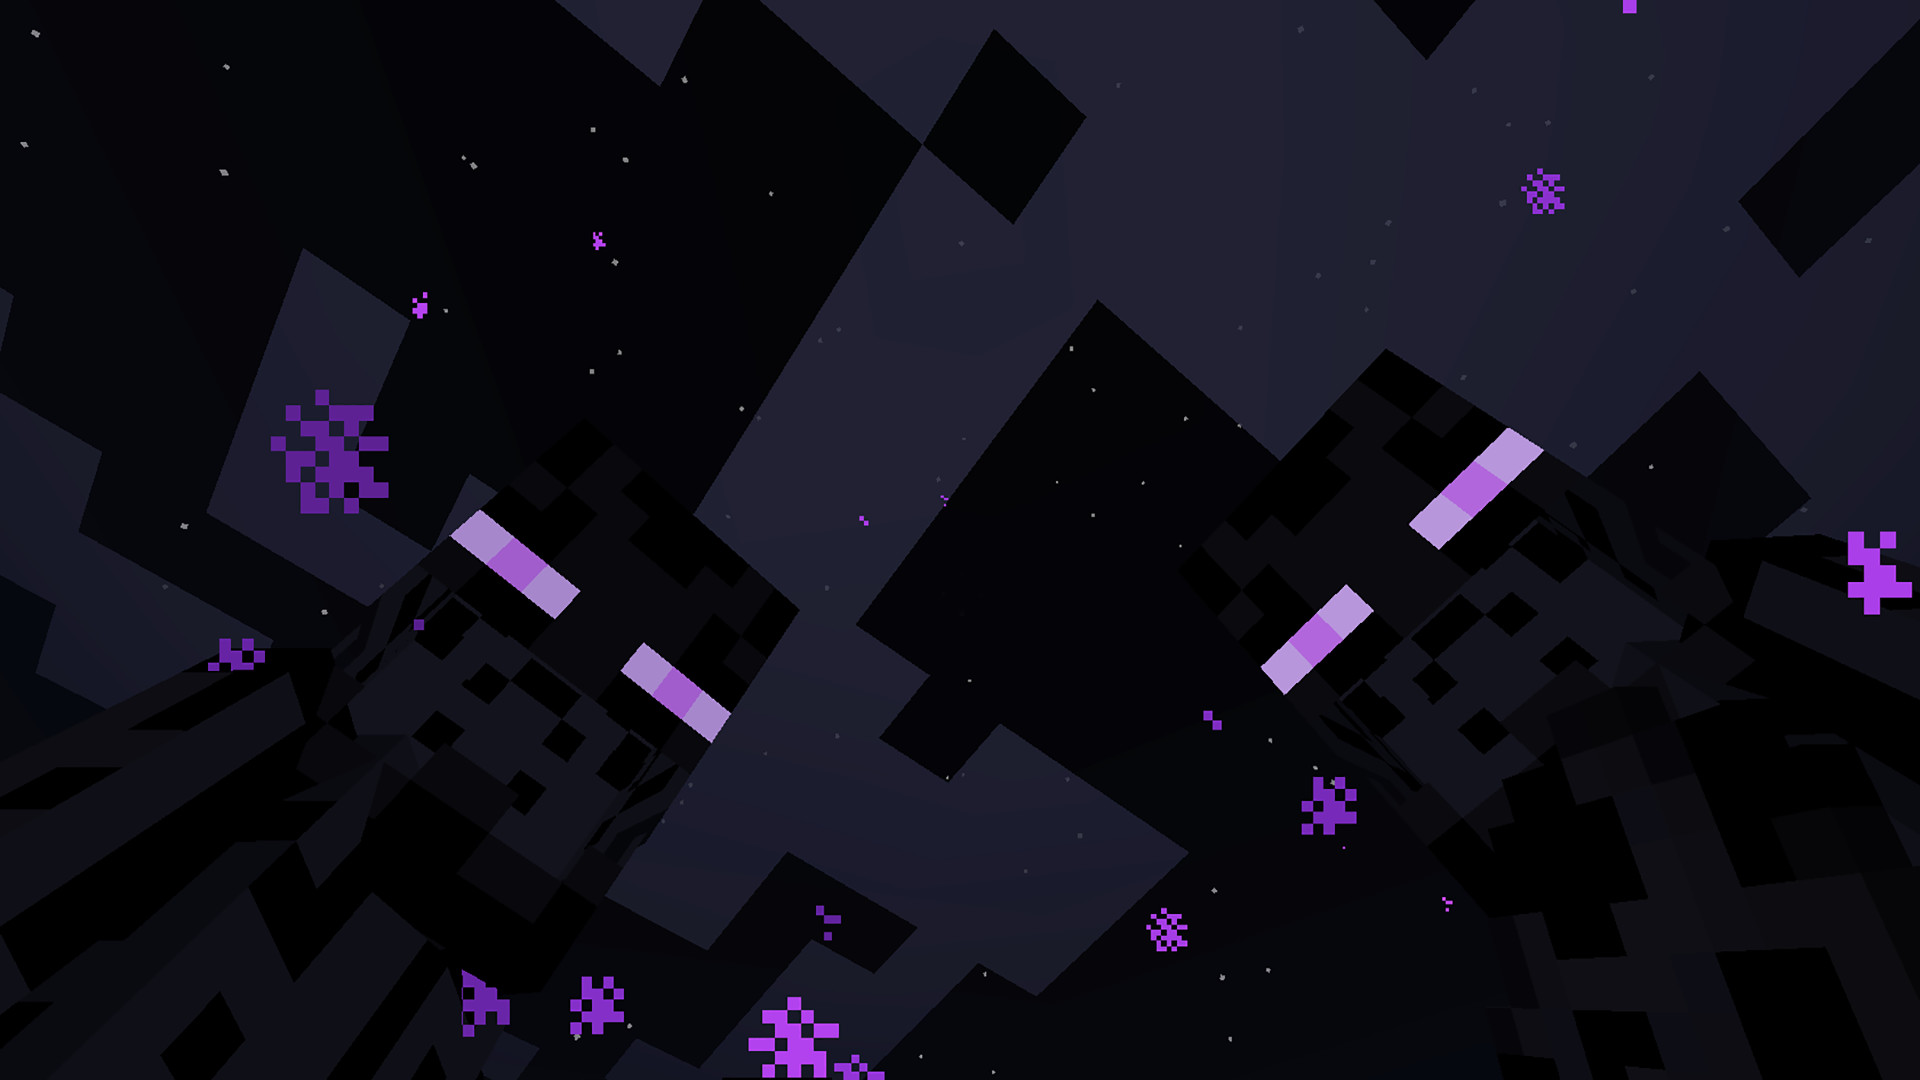 1920x1080 A screencapture of Enderman from Minecraft that I thought would make a neat  wallpaper.